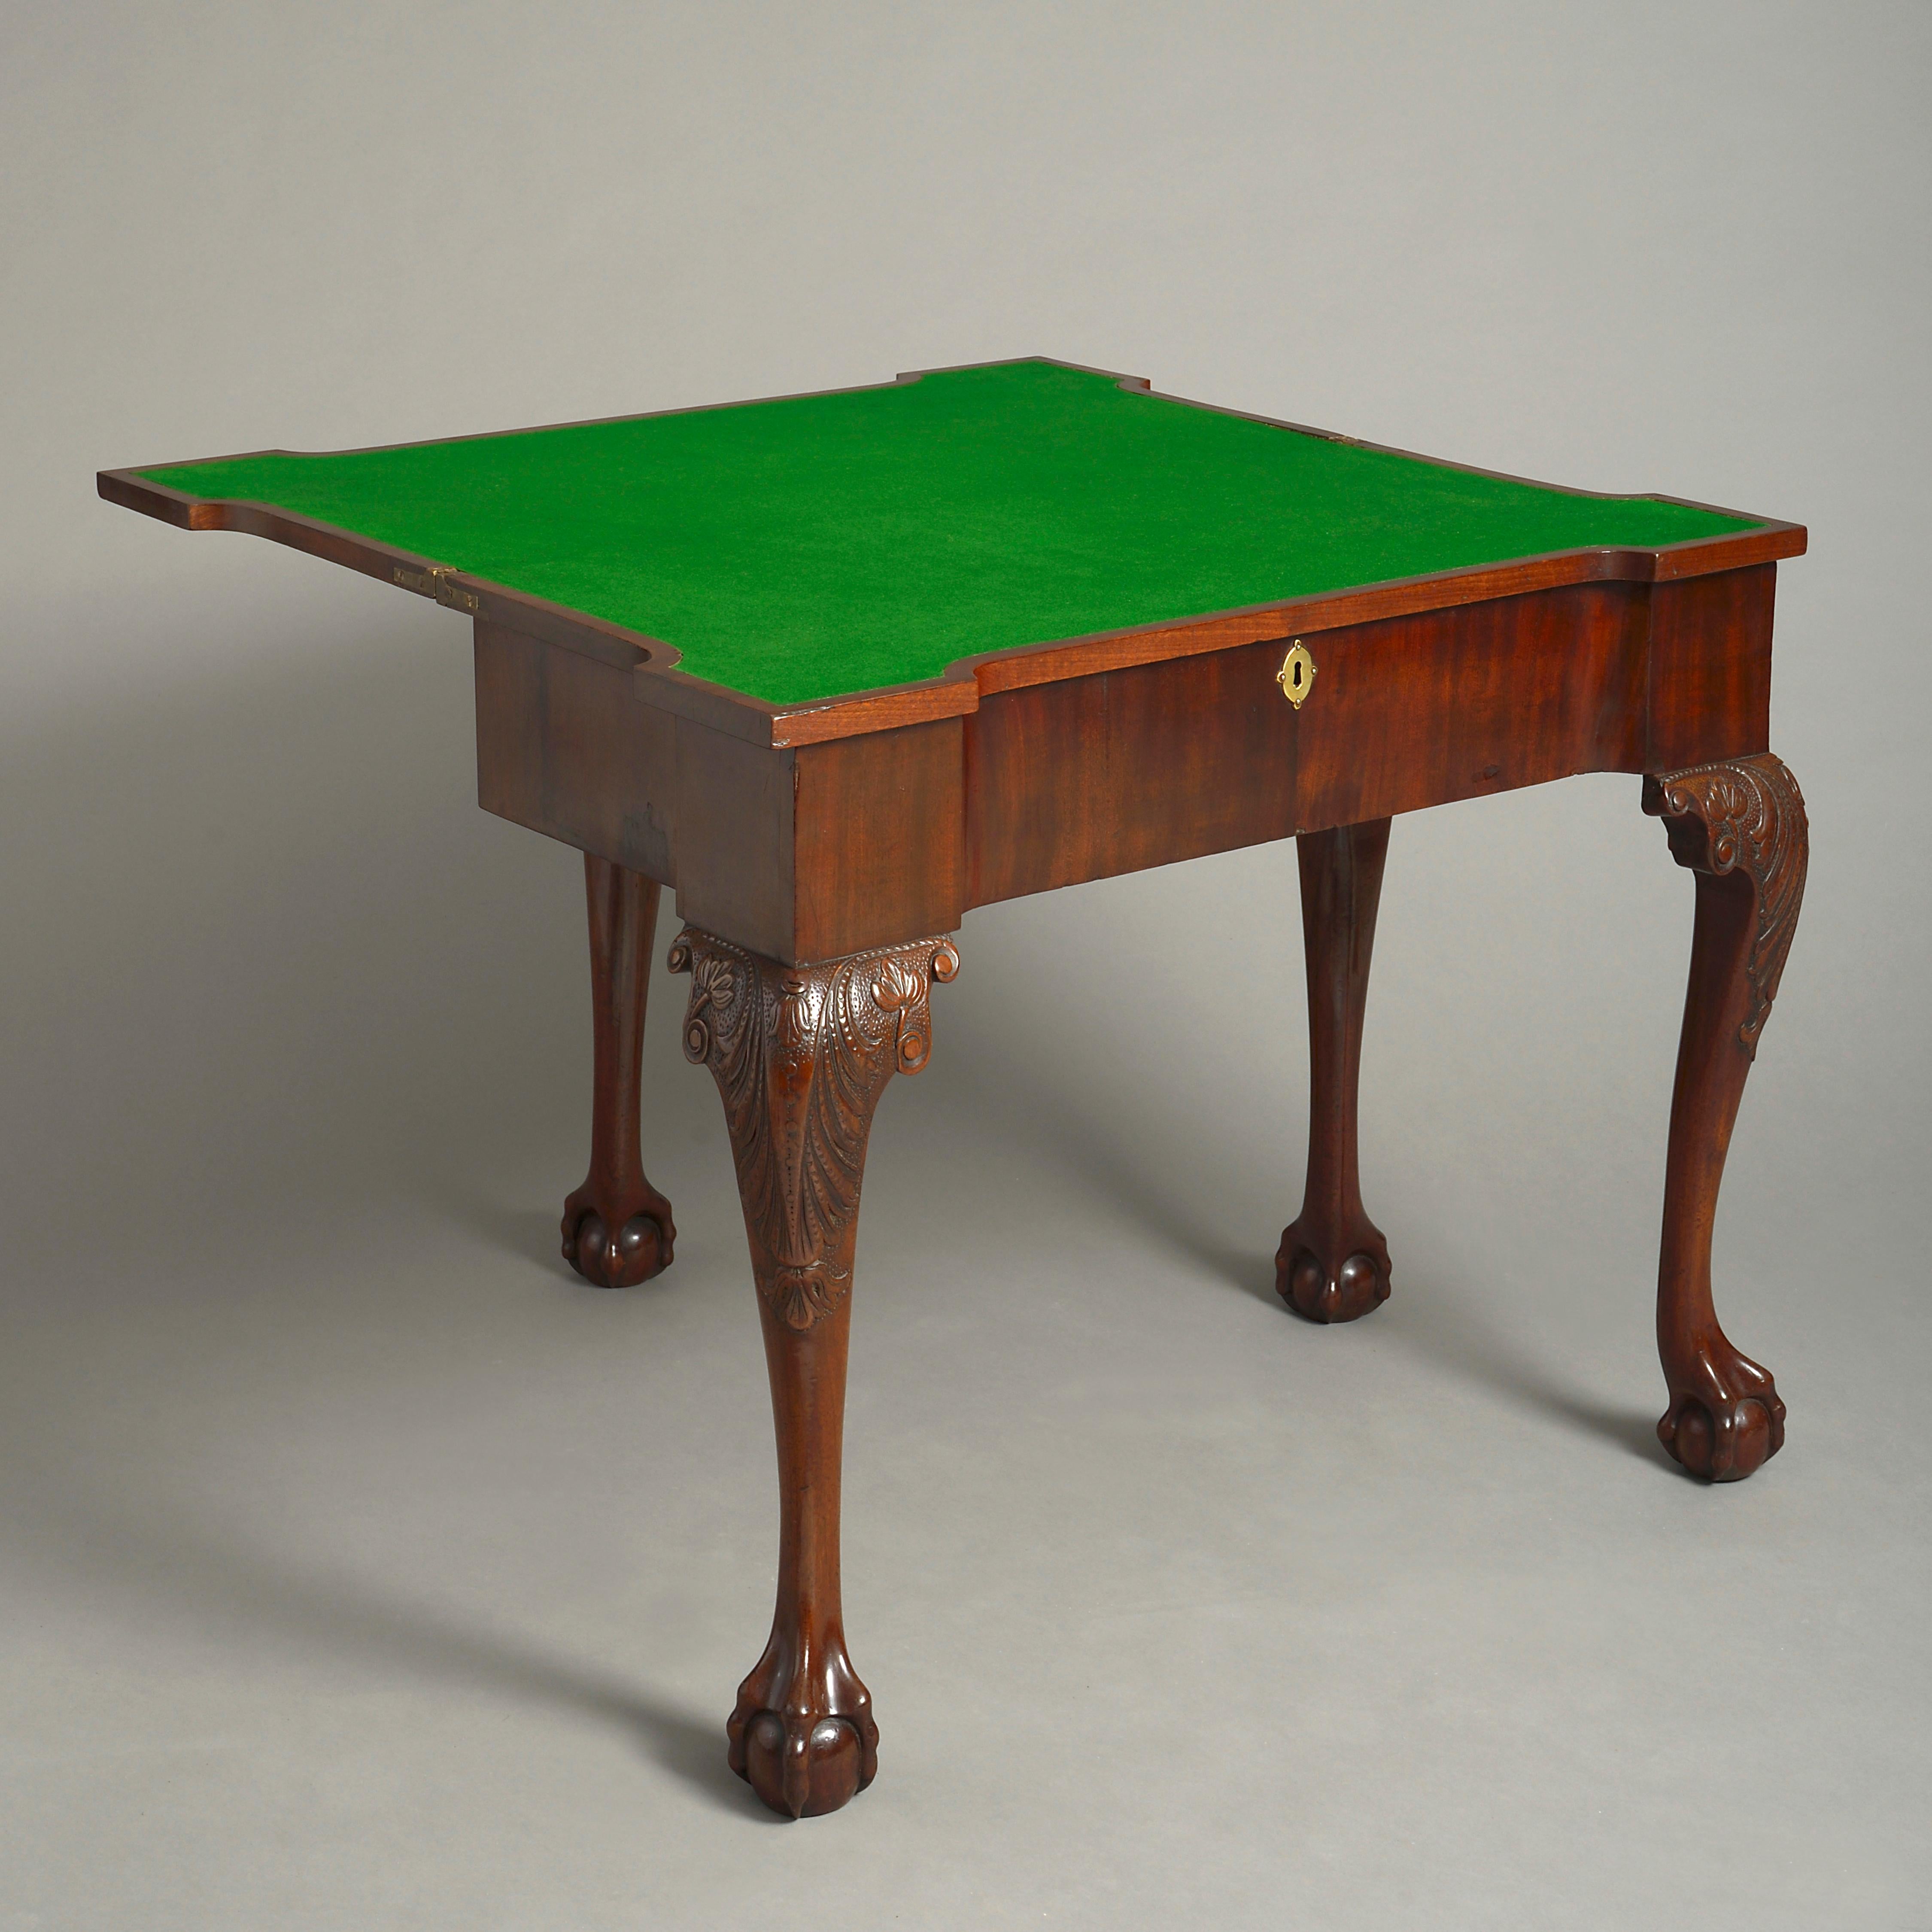 A mid-18th century George II Period mahogany card table of good rich colour, the shaped rectangular top opening to reveal a baize playing surface and also a hidden compartment, all raised upon generous cabriole legs carved with stylised acanthus and